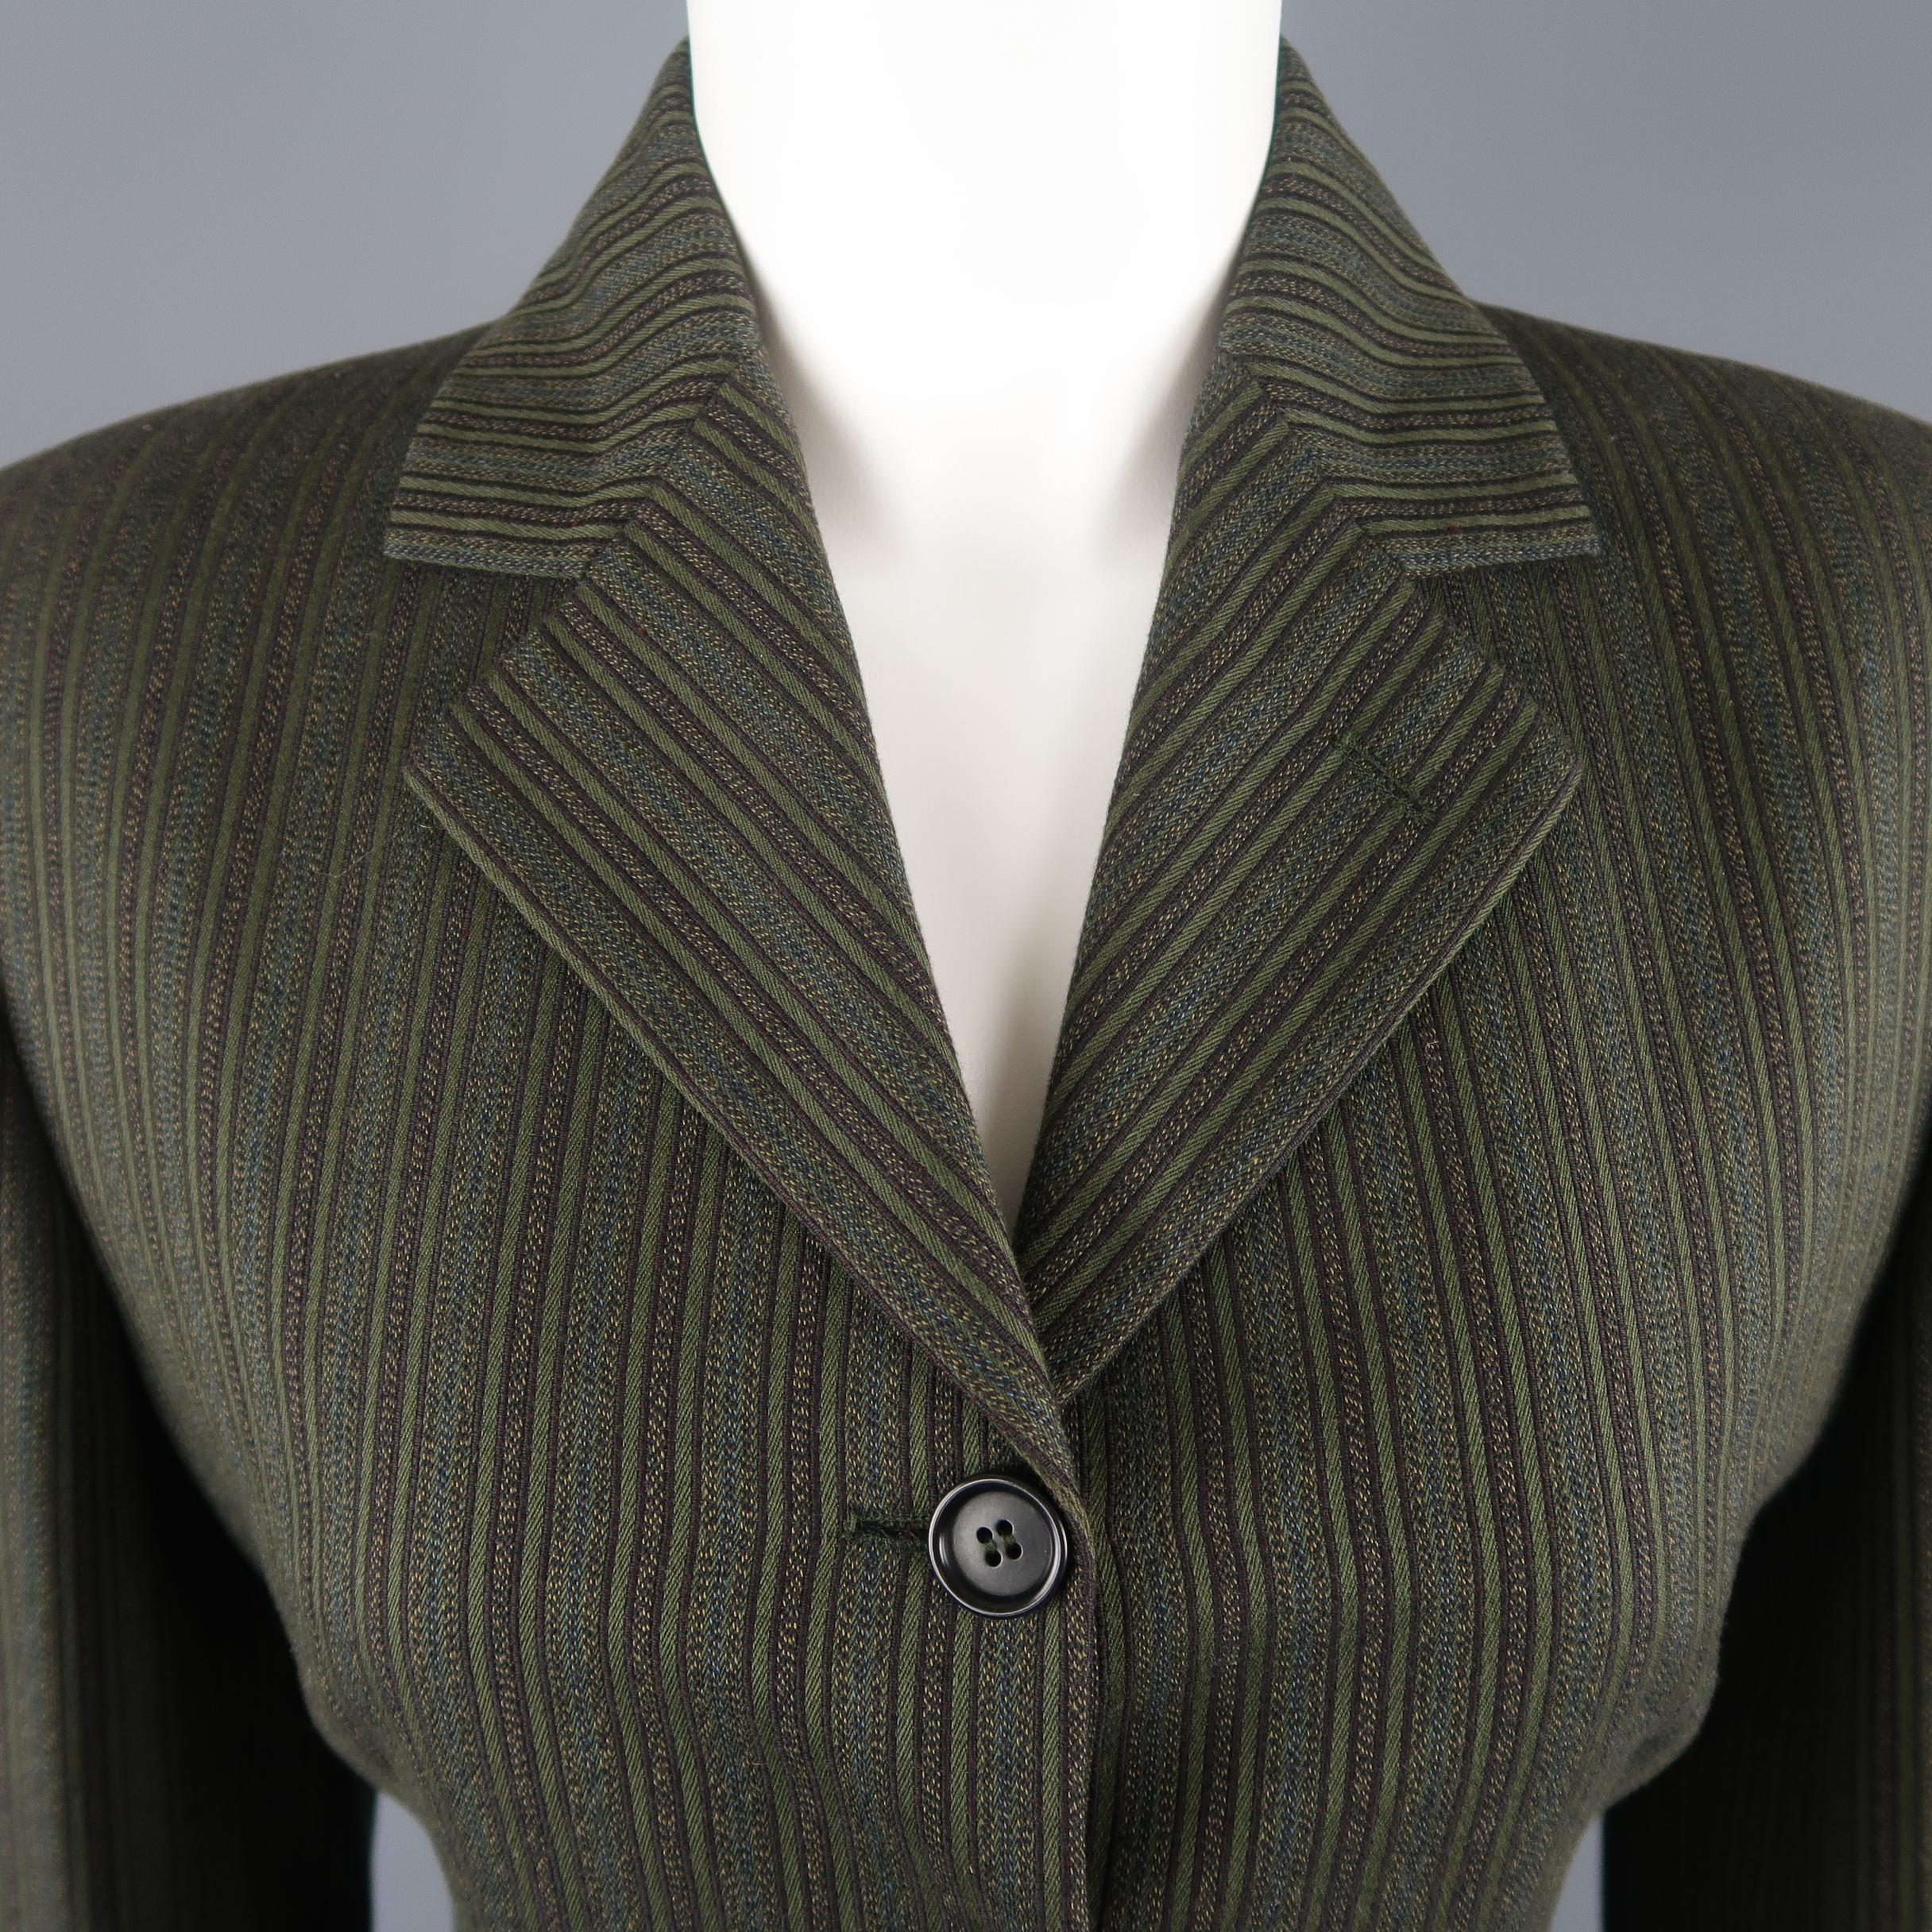 Vintage Romeo Gigli sport jacket comes in green and brown pinstripe pattern cotton with a pointed lapel,single breasted three button half closure, and cascading ruffle hem with long back slit. Made in Italy.
 
Excellent Pre-Owned Condition.
Marked: